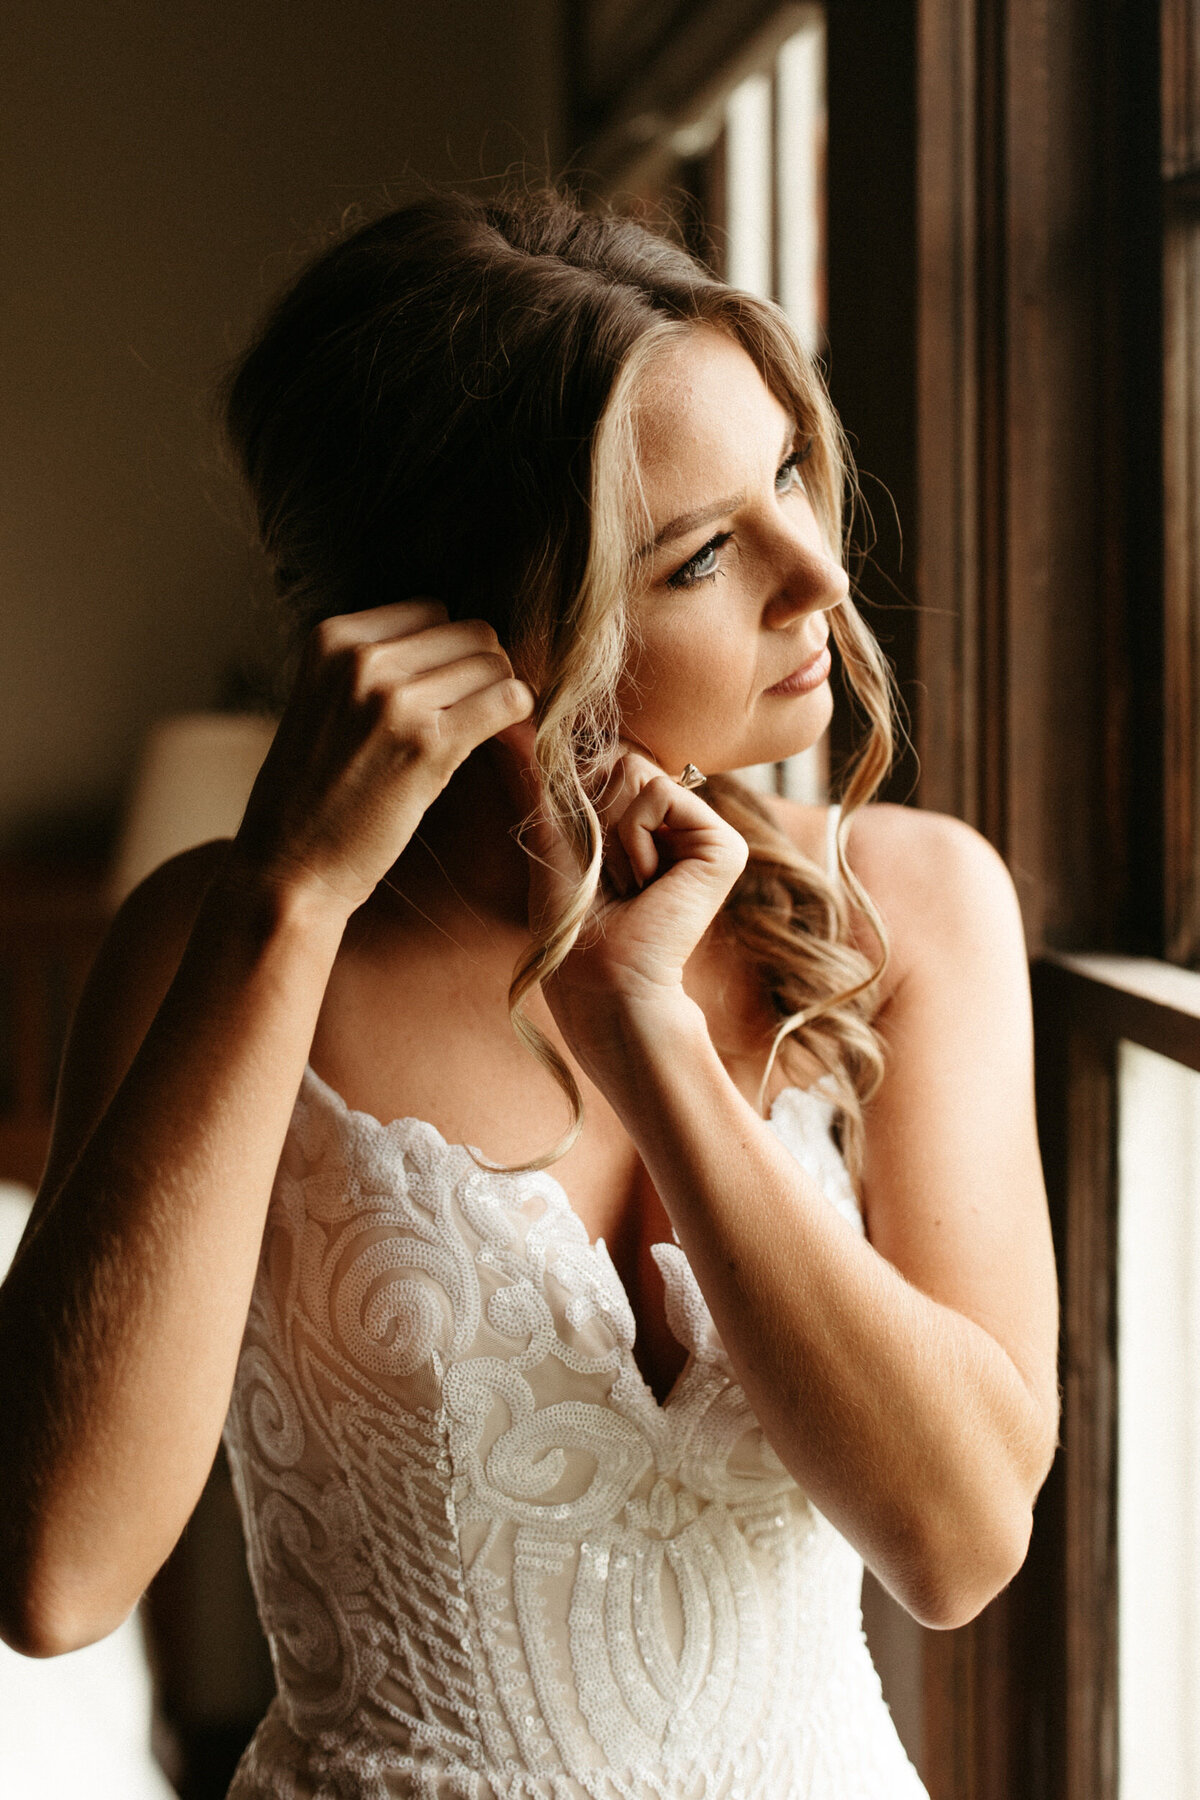 Bride getting ready in front of a window putting her earring in on the morning of her wedding